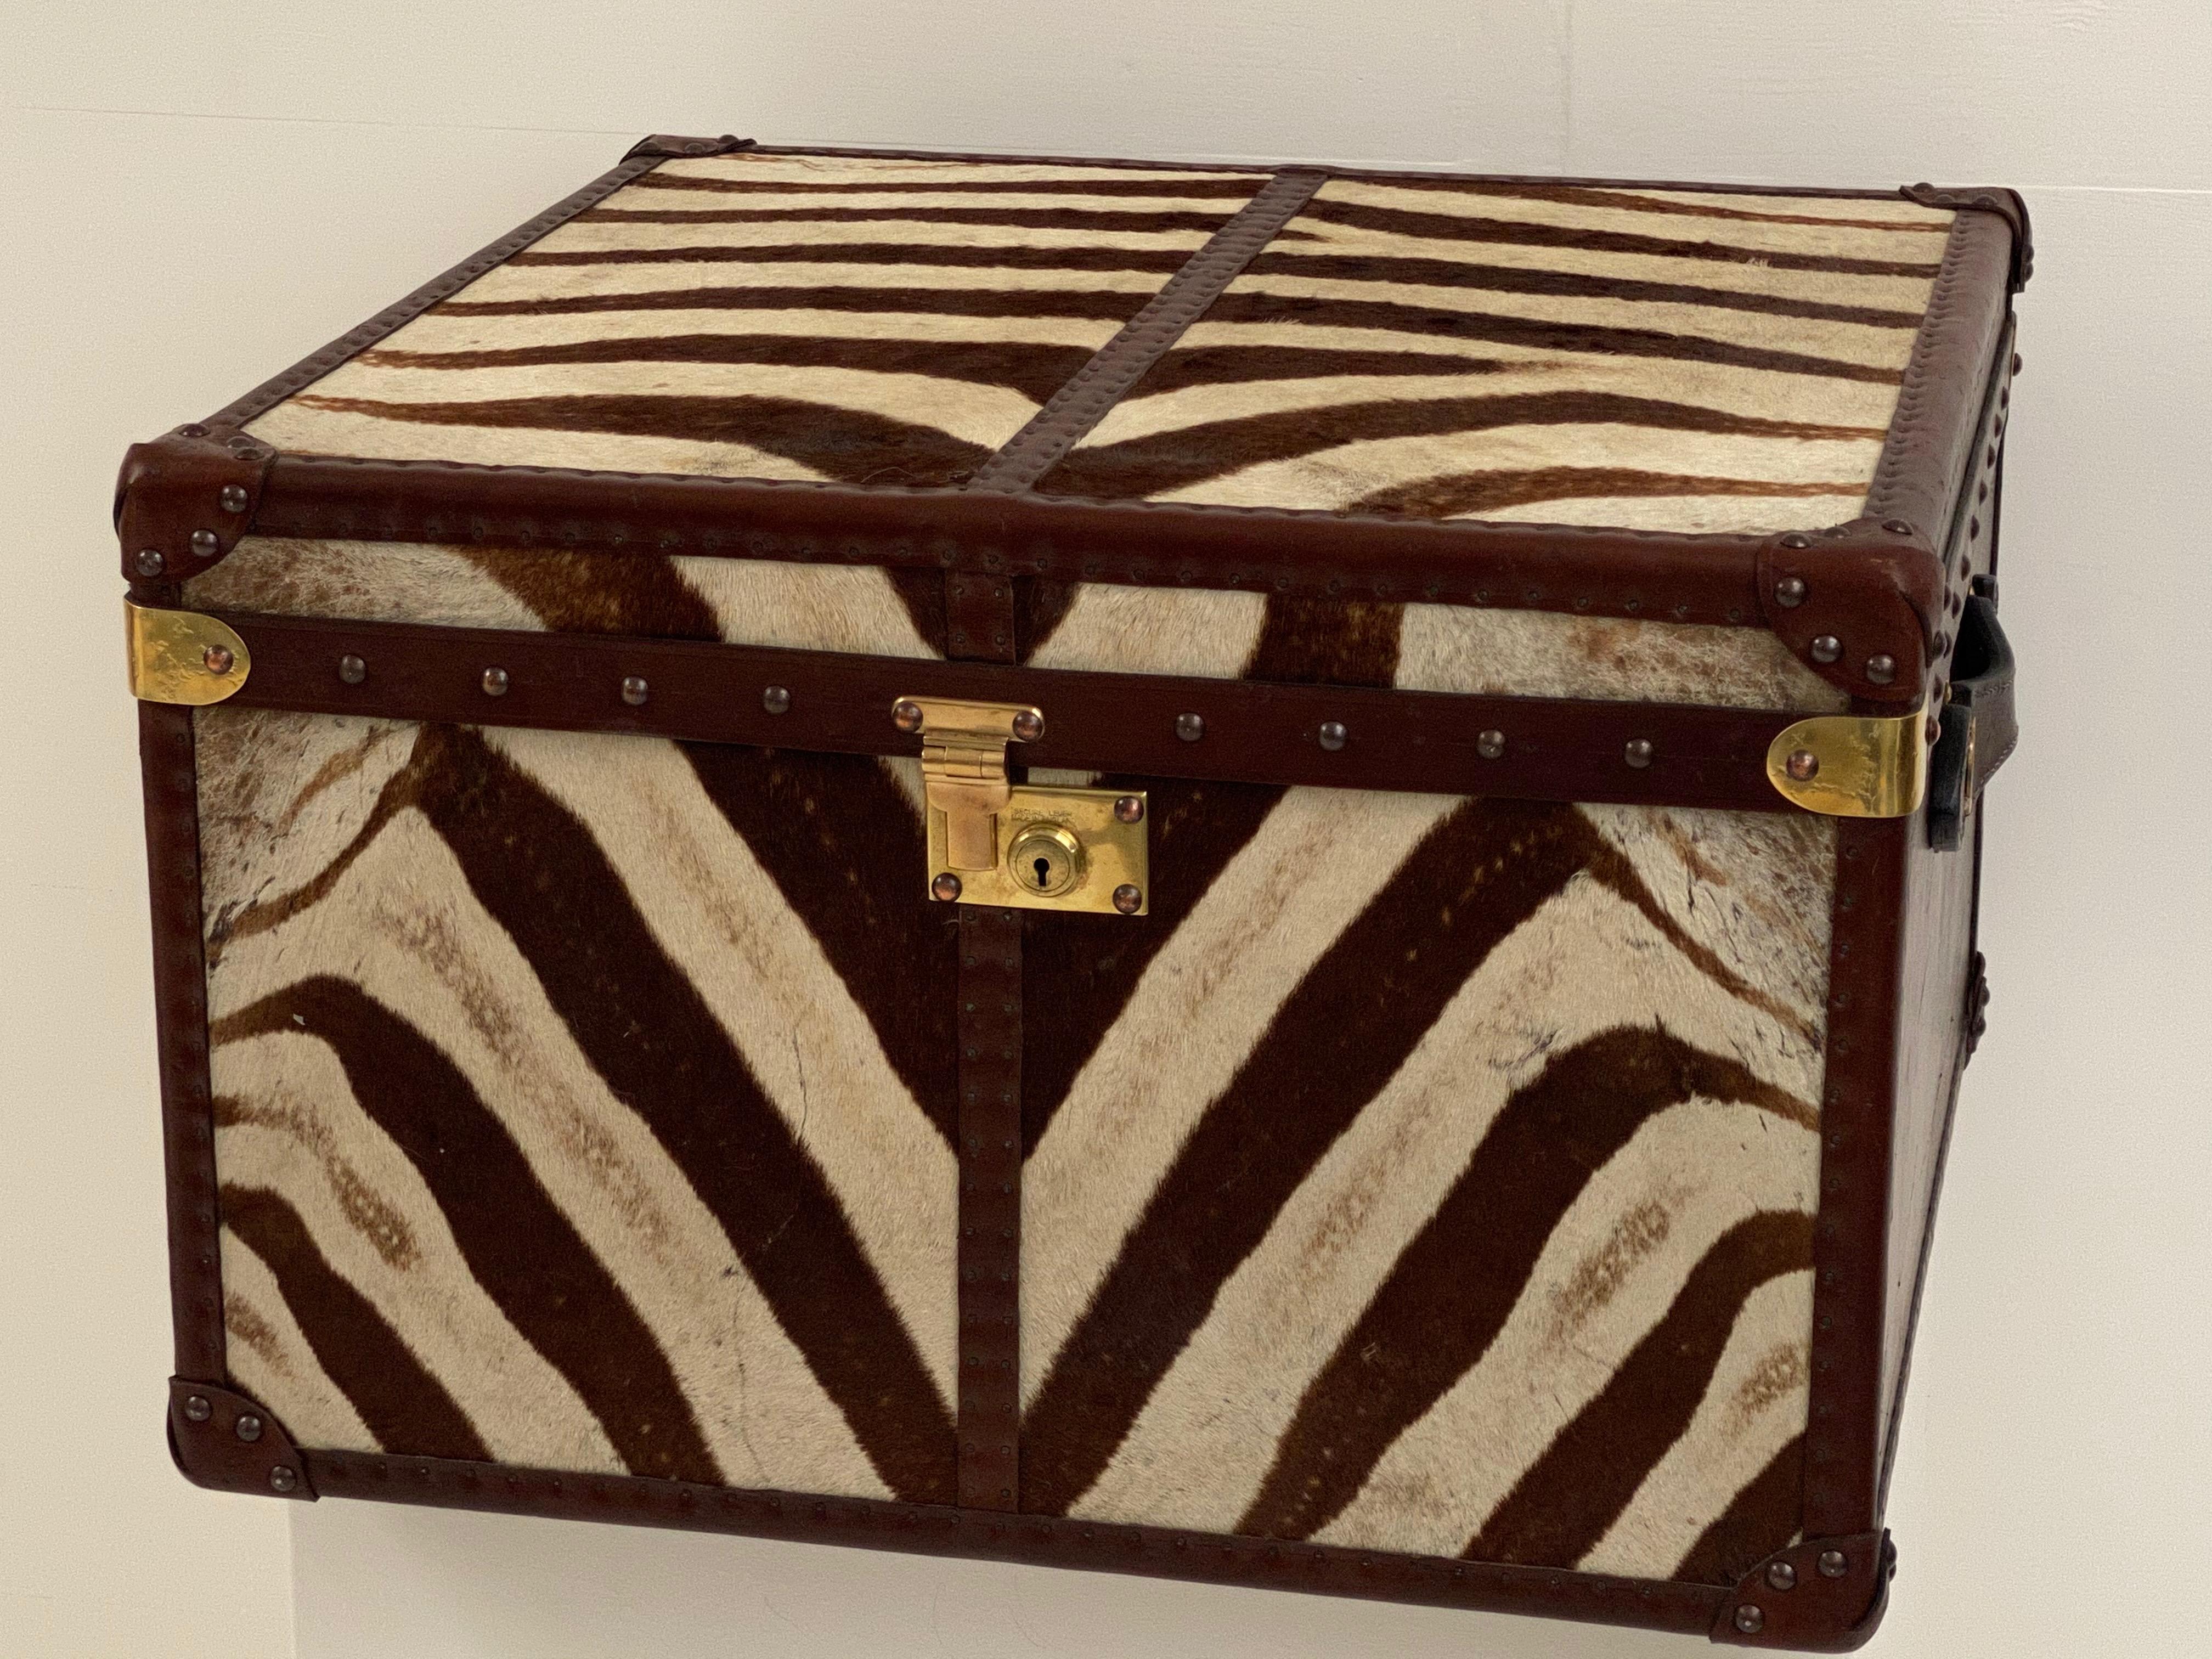 Polished Antique Leather and Zebra Skin Trunk